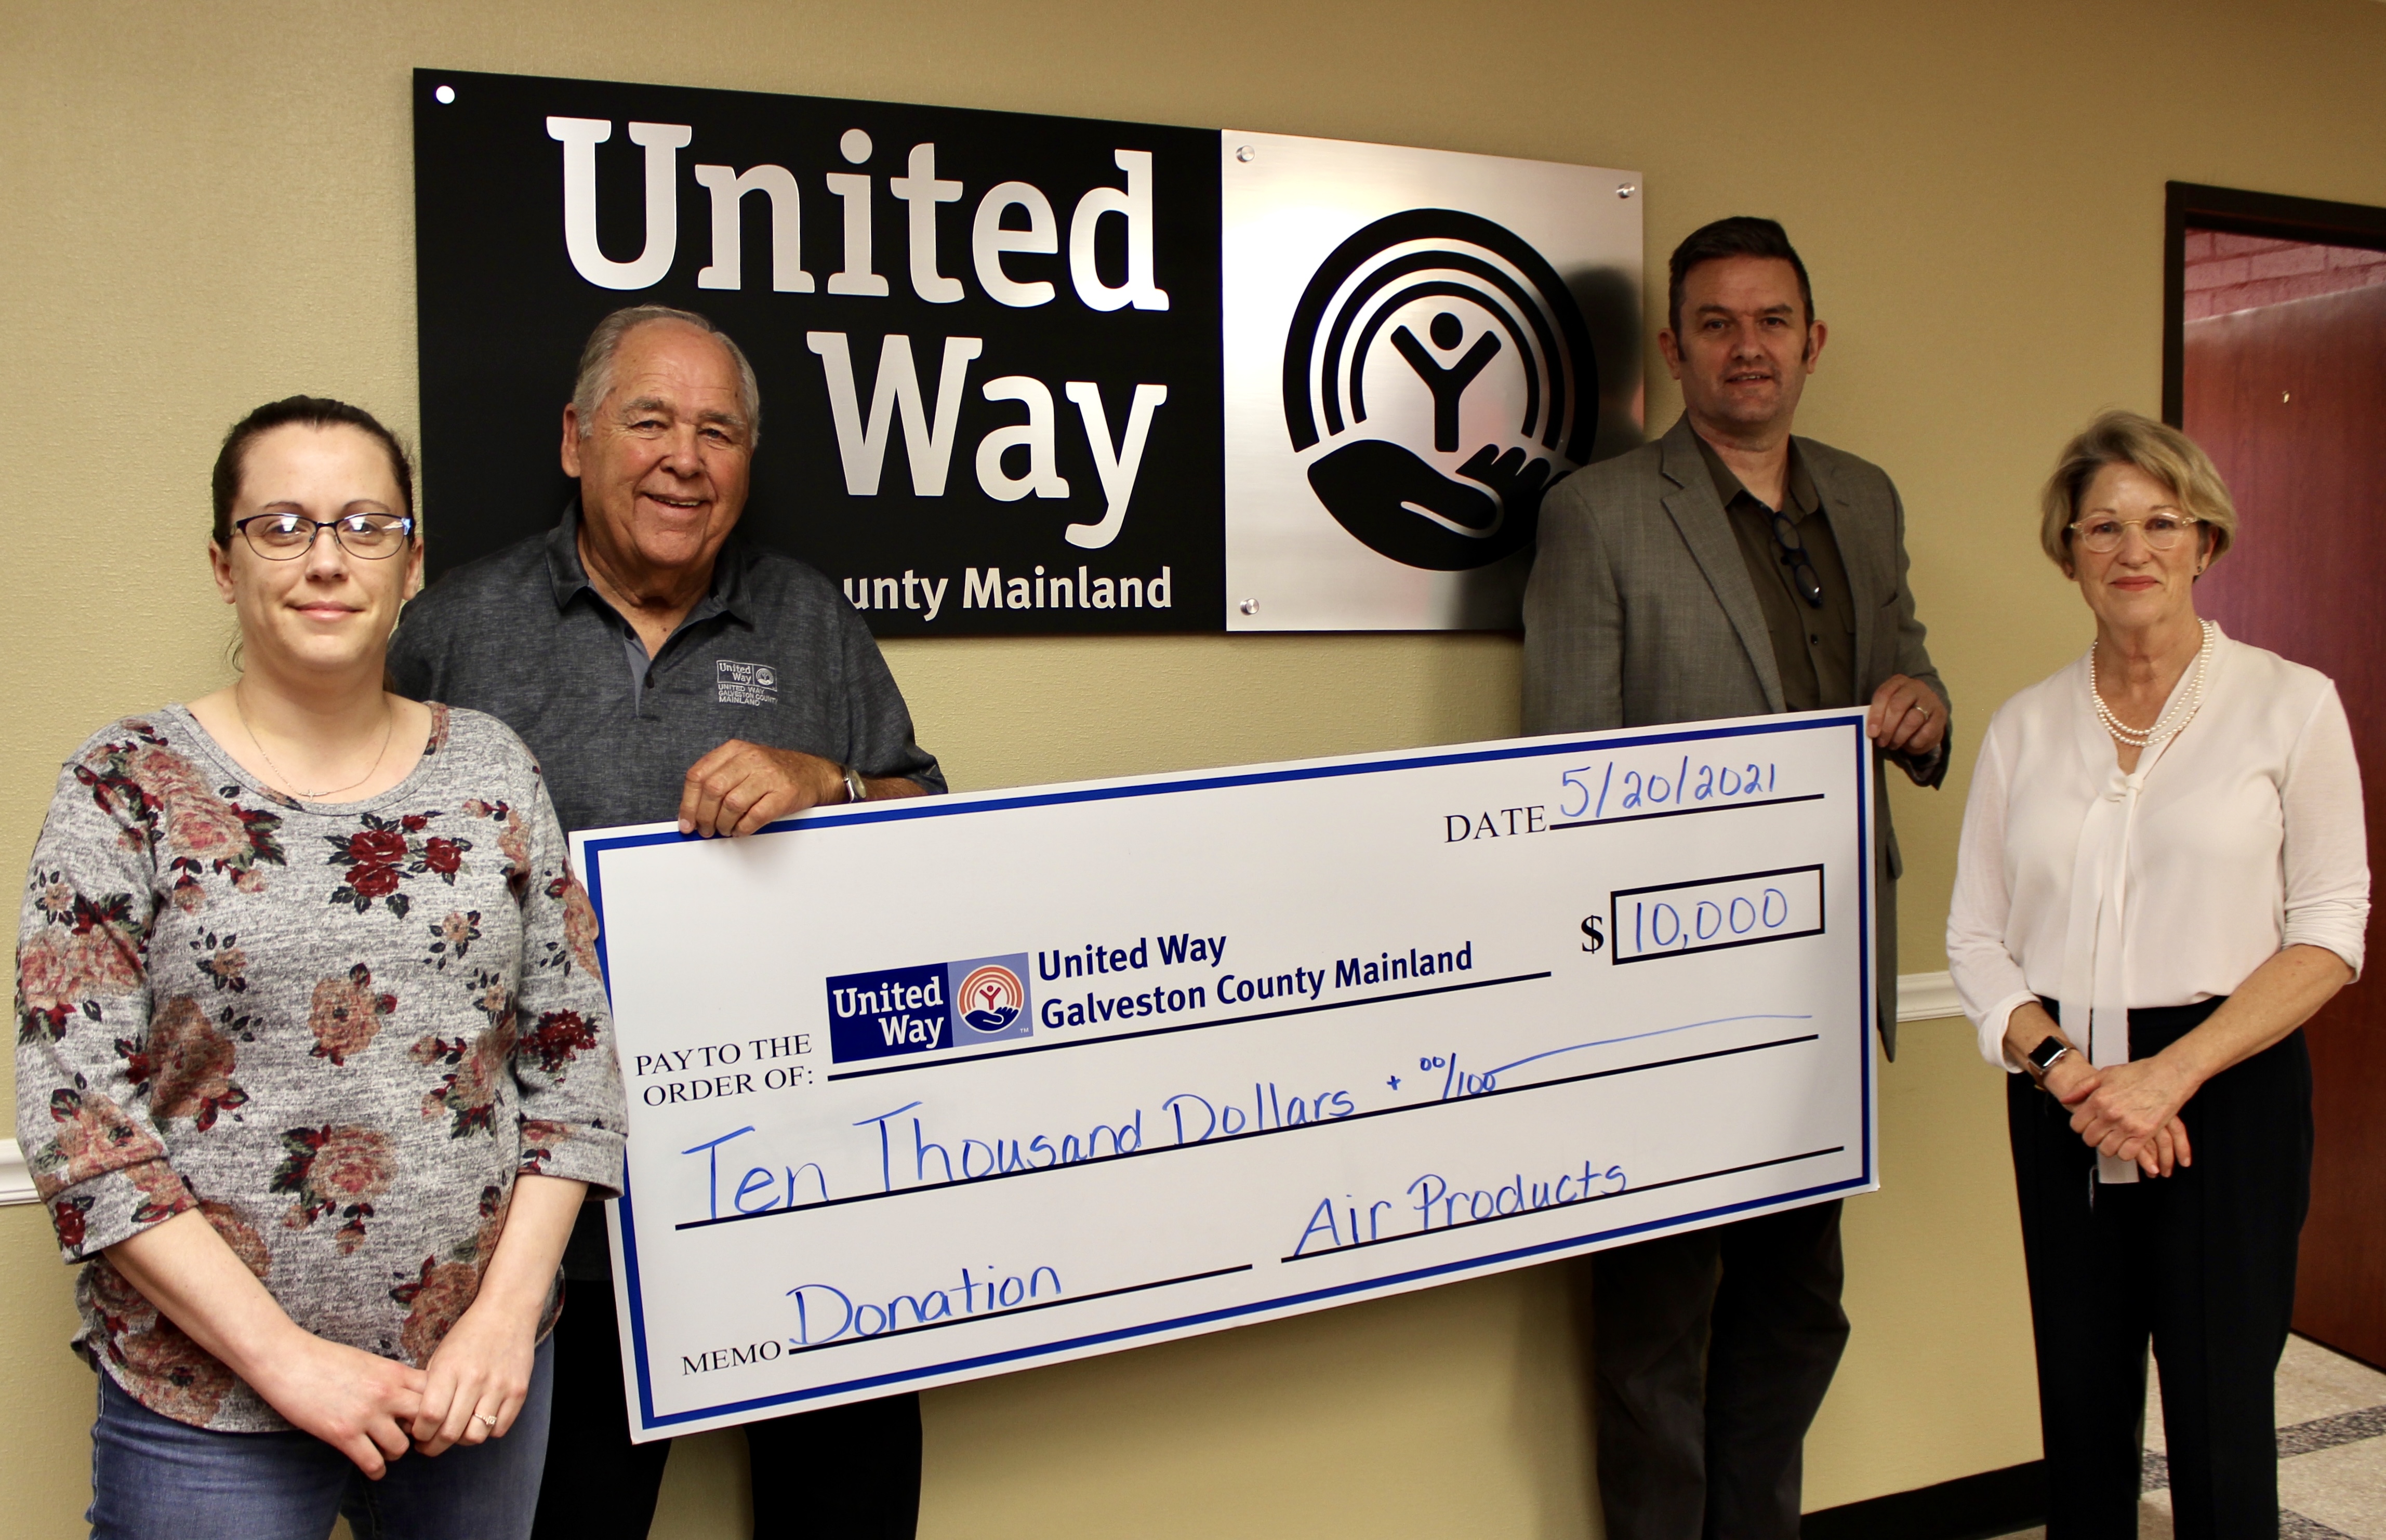 Air Products Foundation Makes $10,000 Donation to United Way Galveston County Mainland: from left, Leslie Ornelas and Chris Delesandri with United Way Galveston County Mainland, Andrew Connolly with Air Products and Kathy Thomas with Community Strategies LLC.